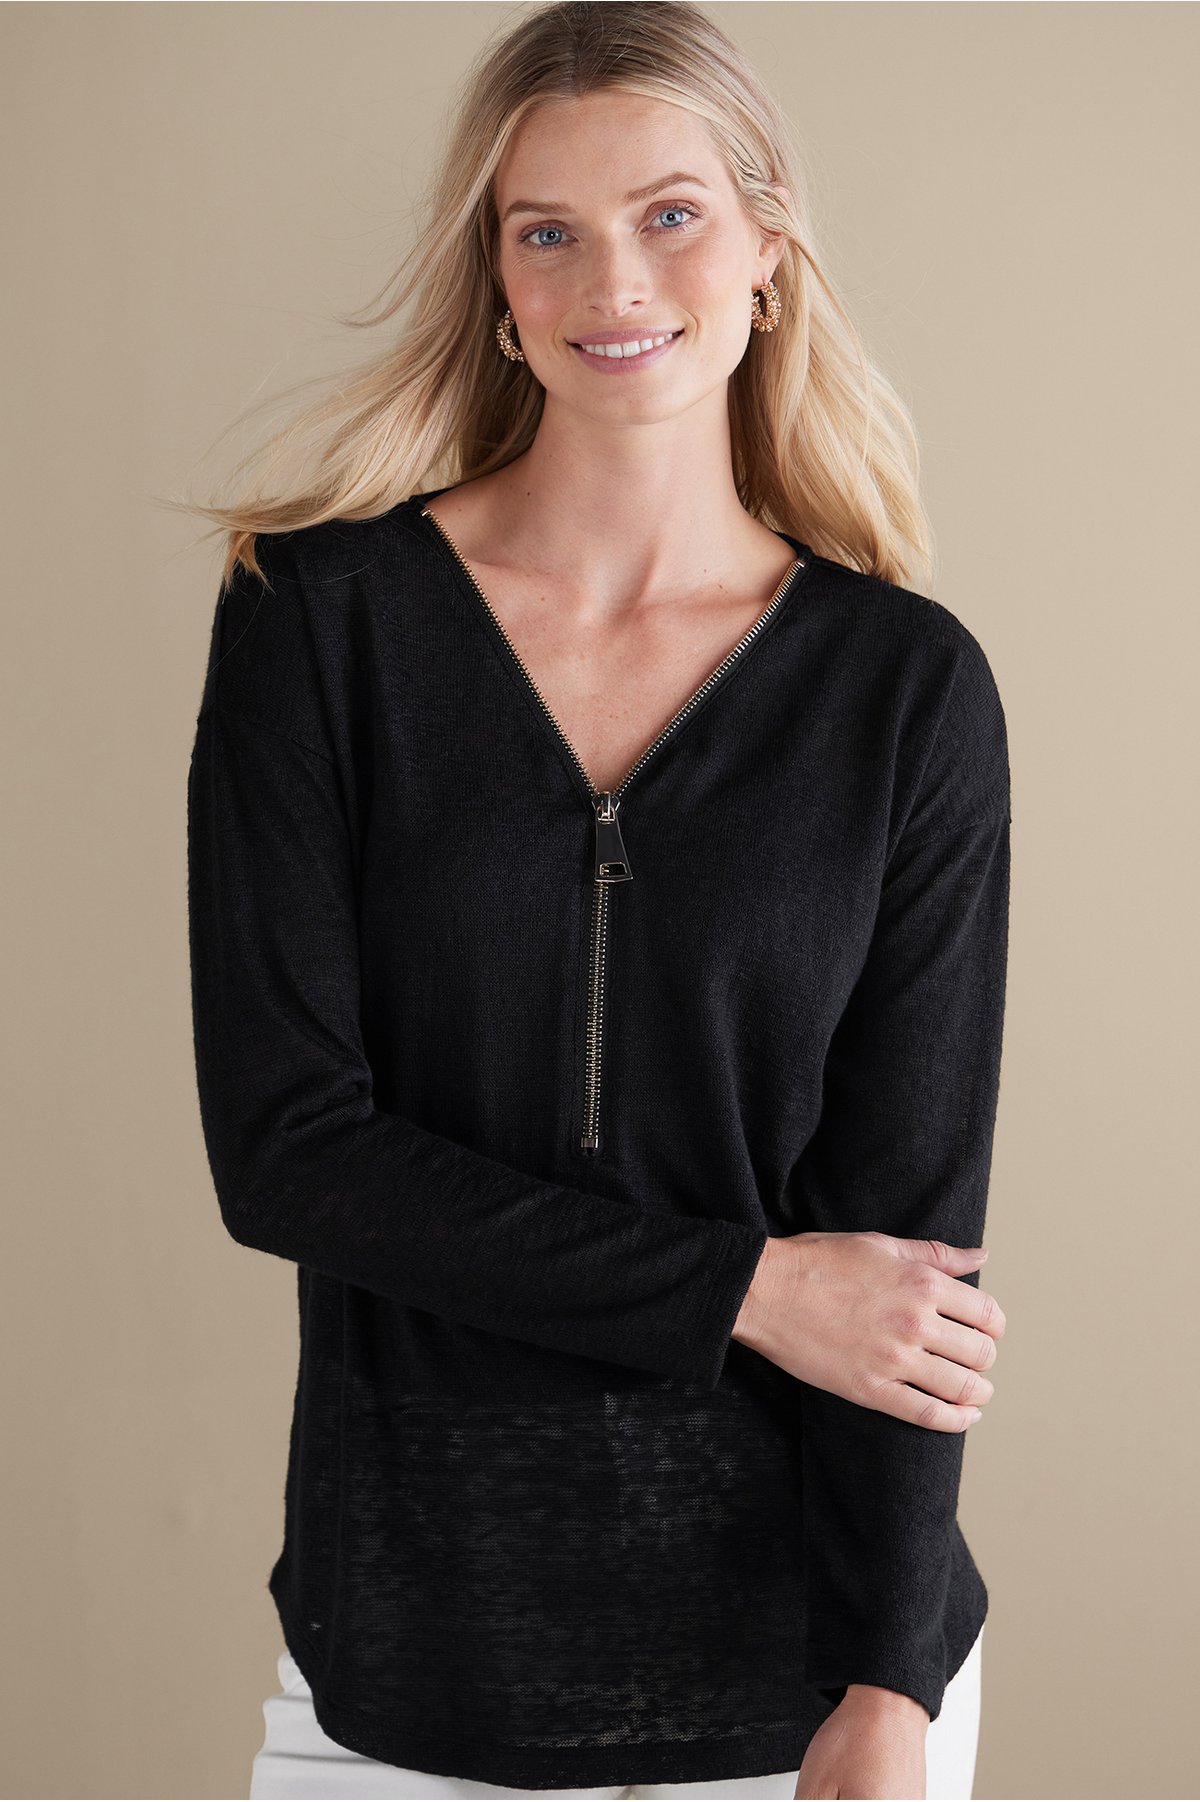 Women's Valentina Zip Sweater by Soft Surroundings, in Black size M (10-12)